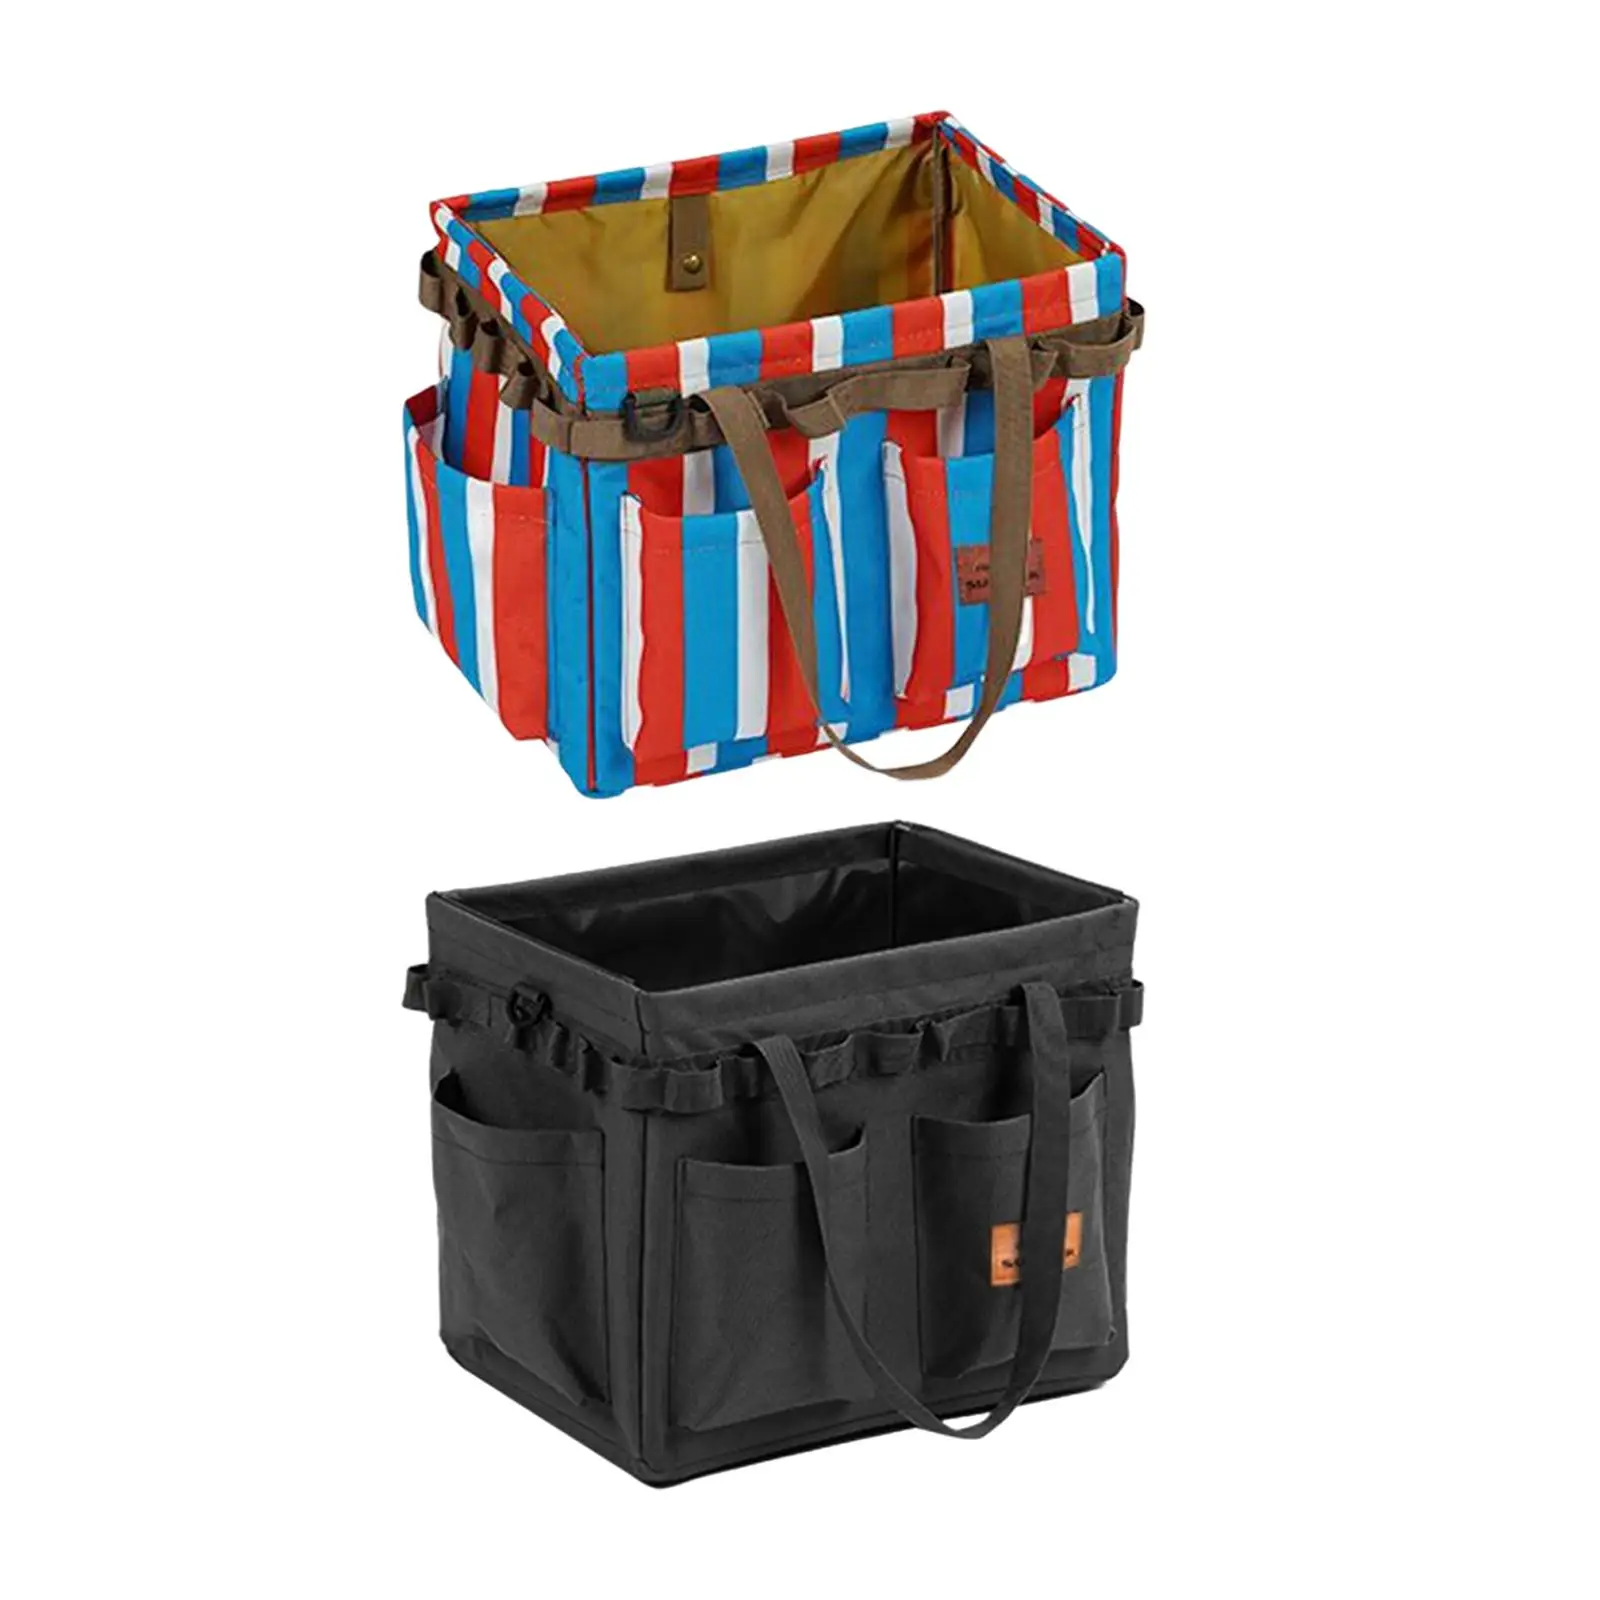 Reusable Utility Tote Tool Organizer Cooking Outdoor Camping Storage Bag